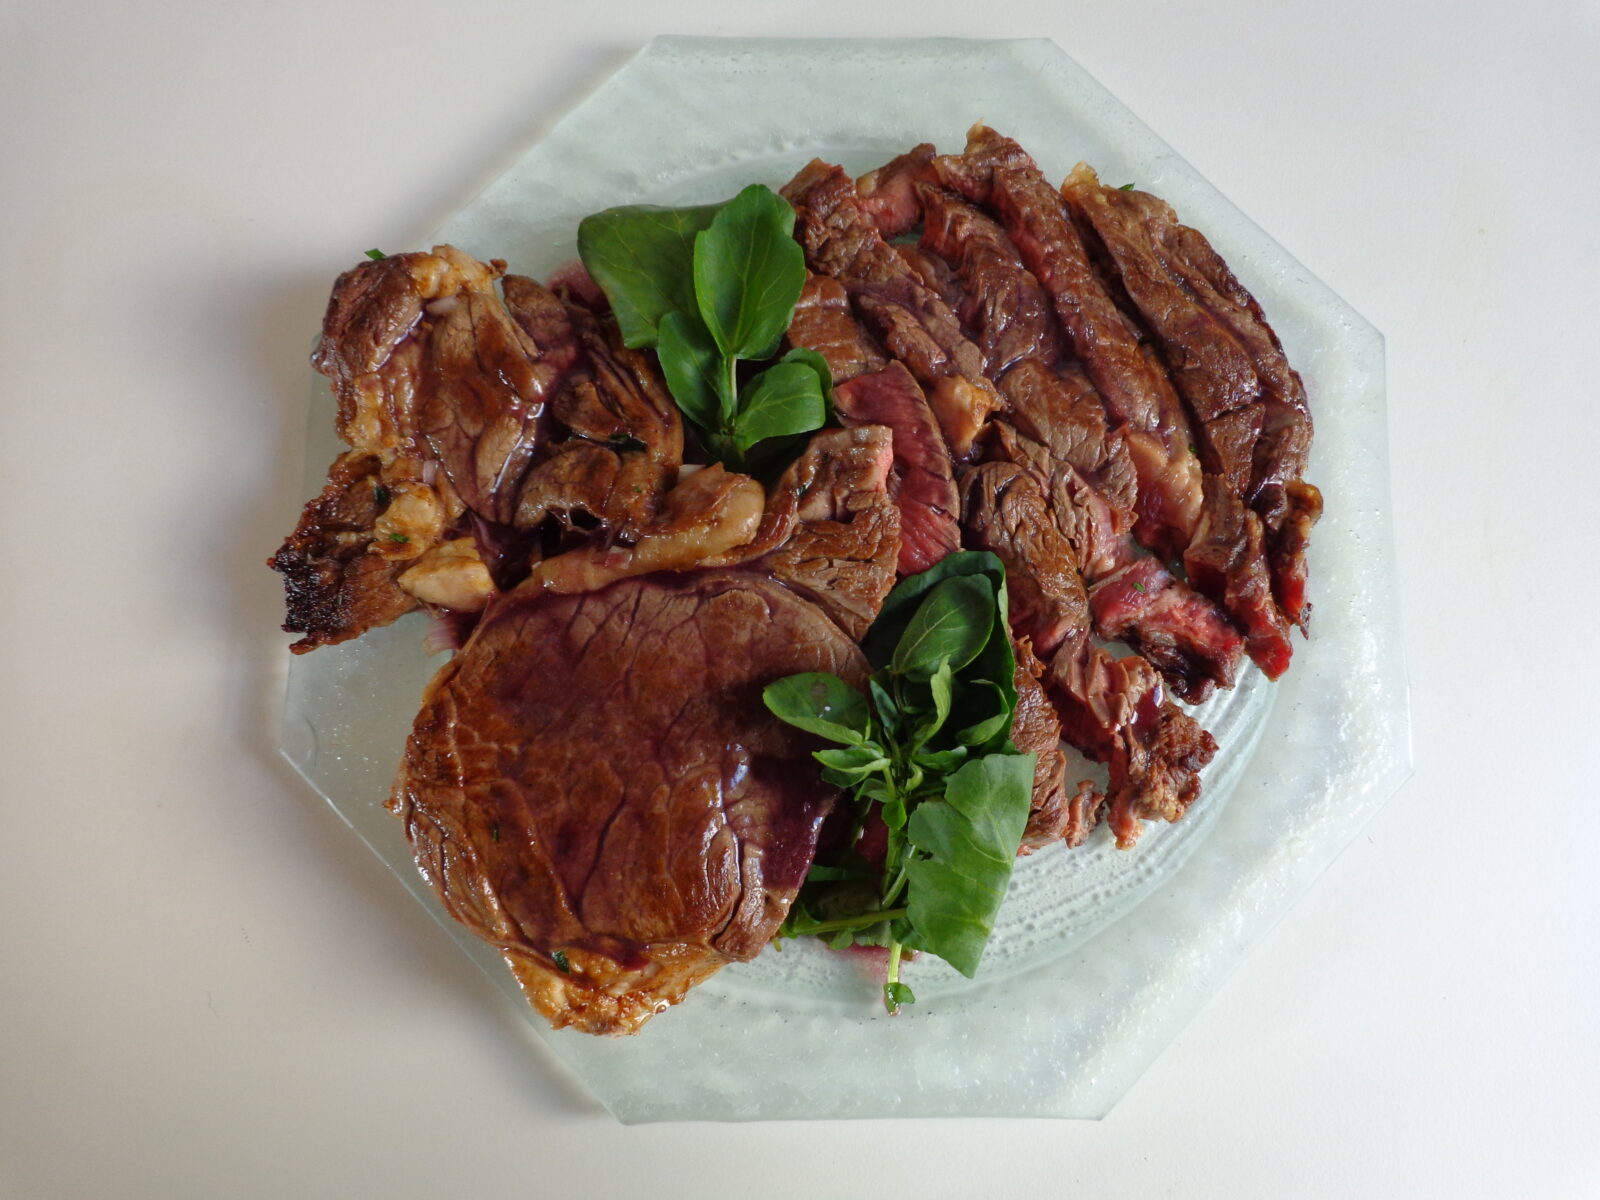 Pan Seared Steak With Shallots The Everyday French Chef,Best Jello Shot Recipe